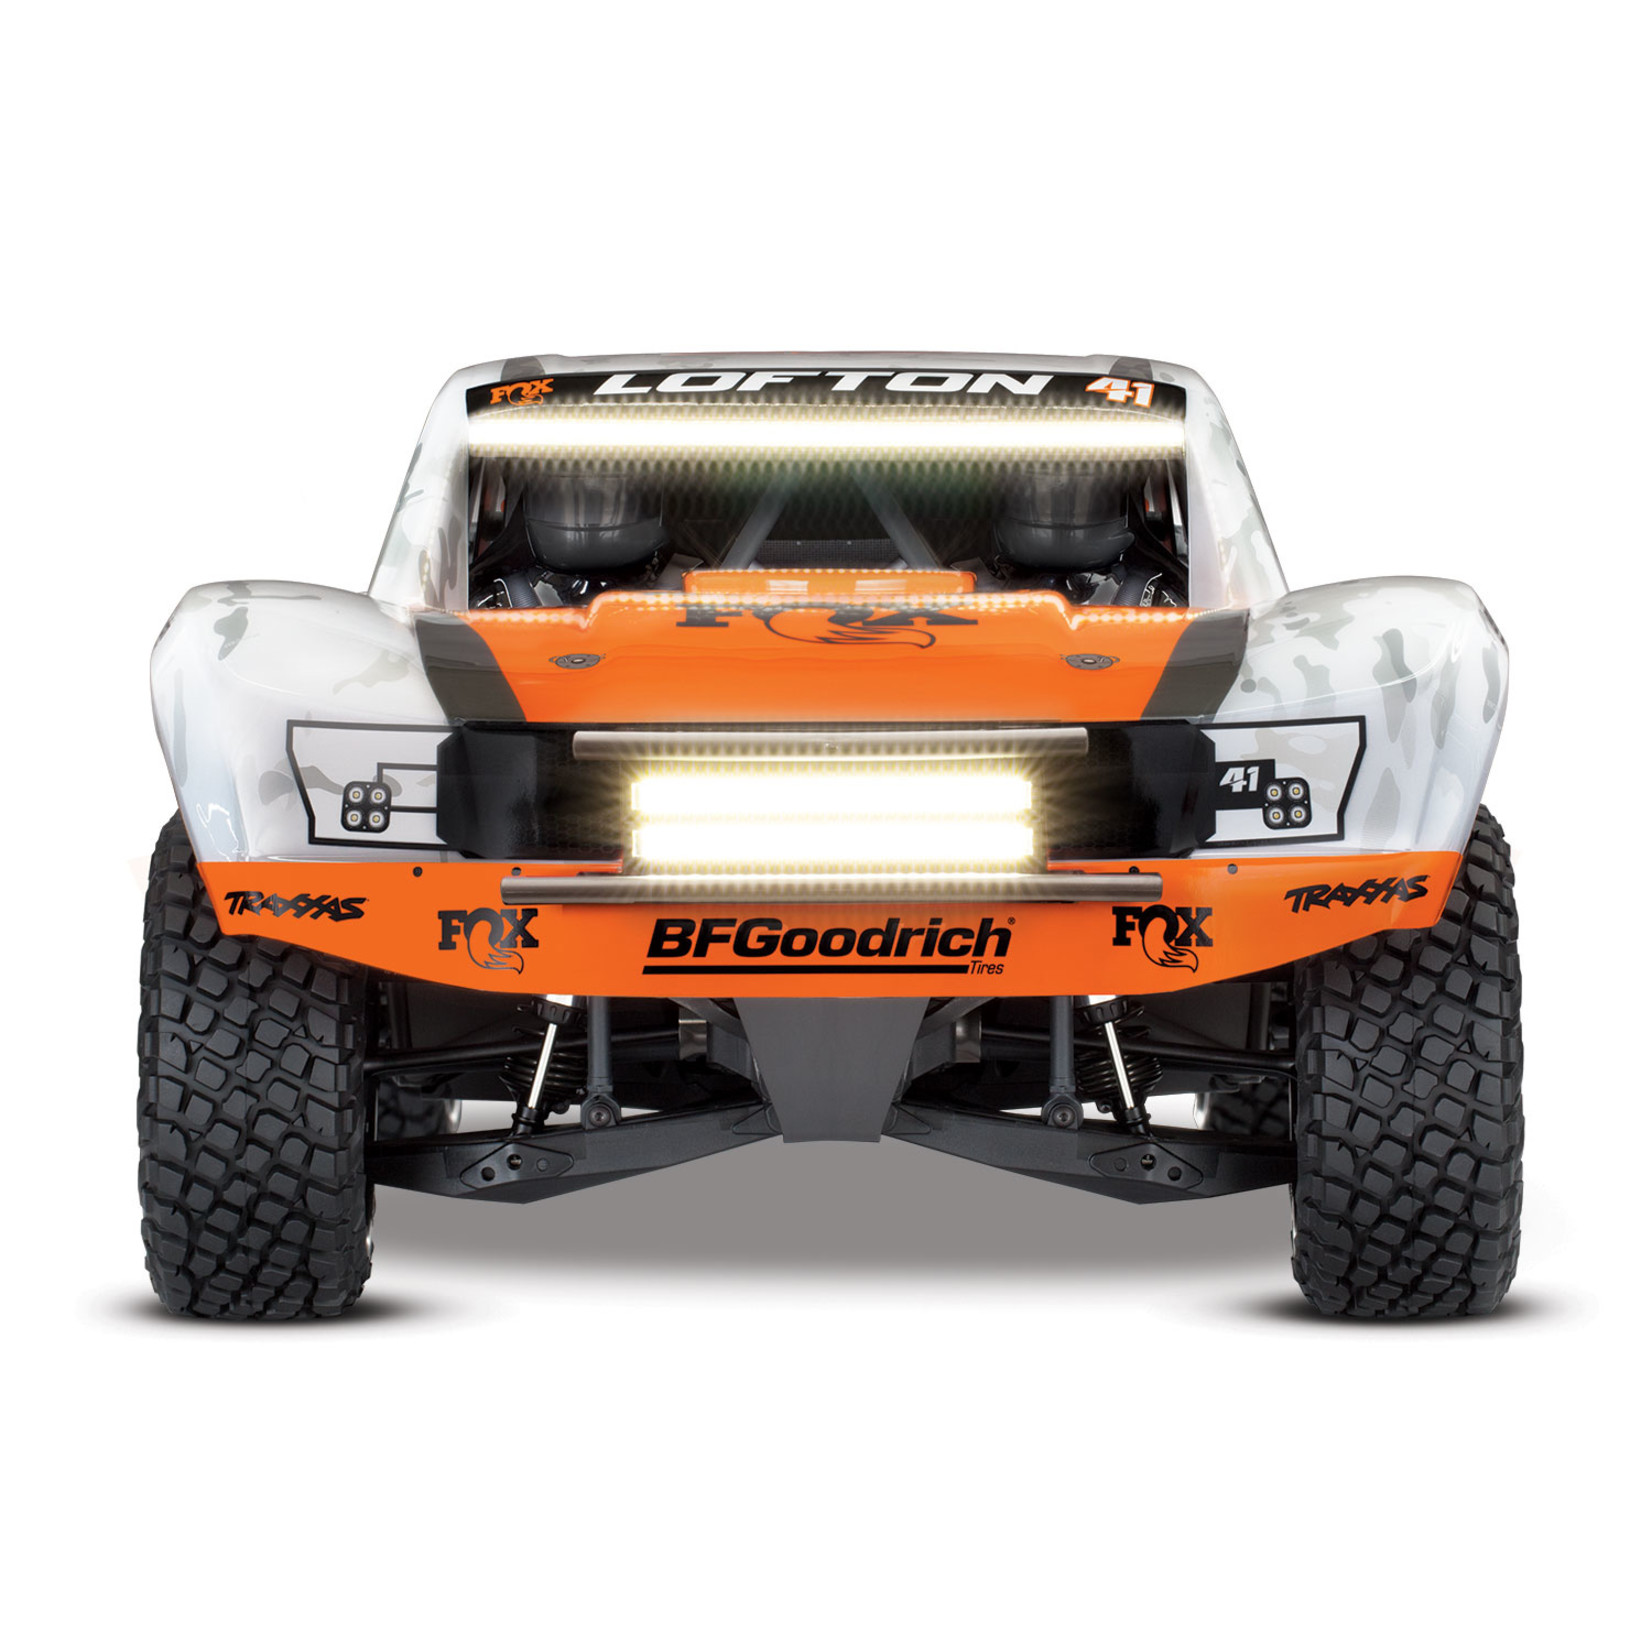 Traxxas Unlimited Desert Racer: Pro-Scale 4WD Brushless Electric Race Truck with Traxxas Stability Management (TSM) and LED lights